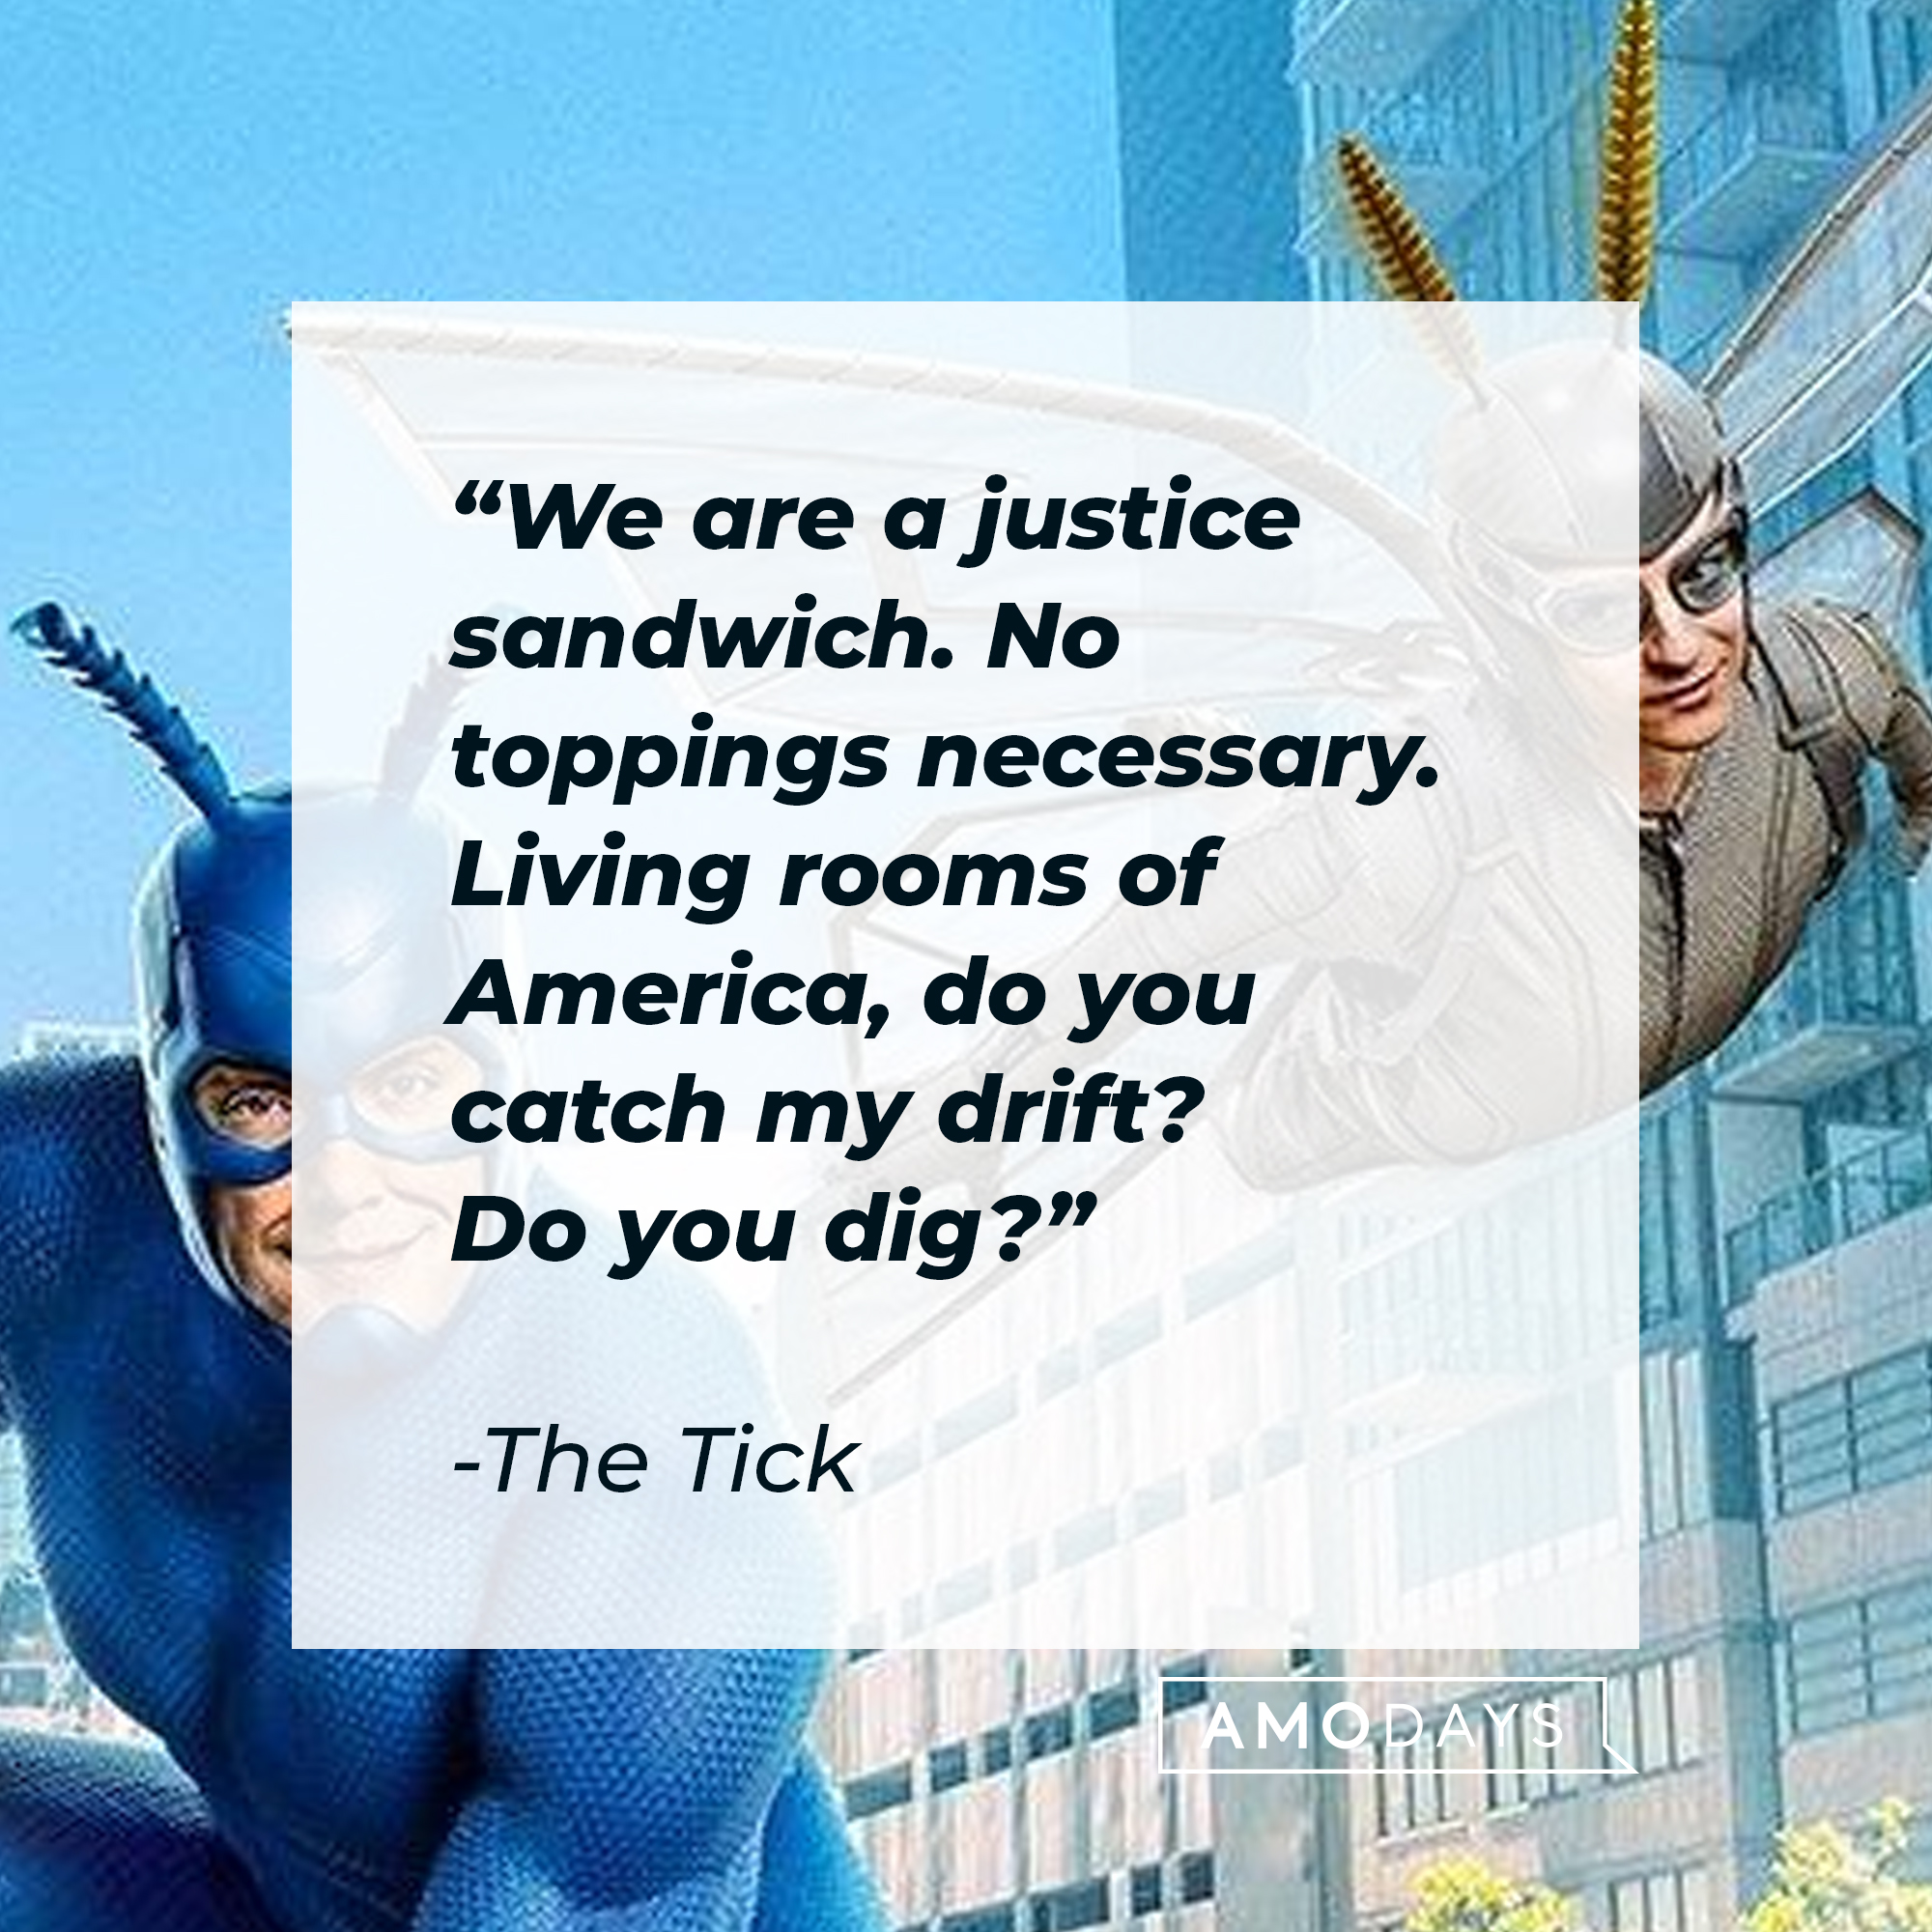 The Tick's quote: "We are a justice sandwich. No toppings necessary. Living rooms of America, do you catch my drift? Do you dig?" | Source: Facebook.com/TheTick